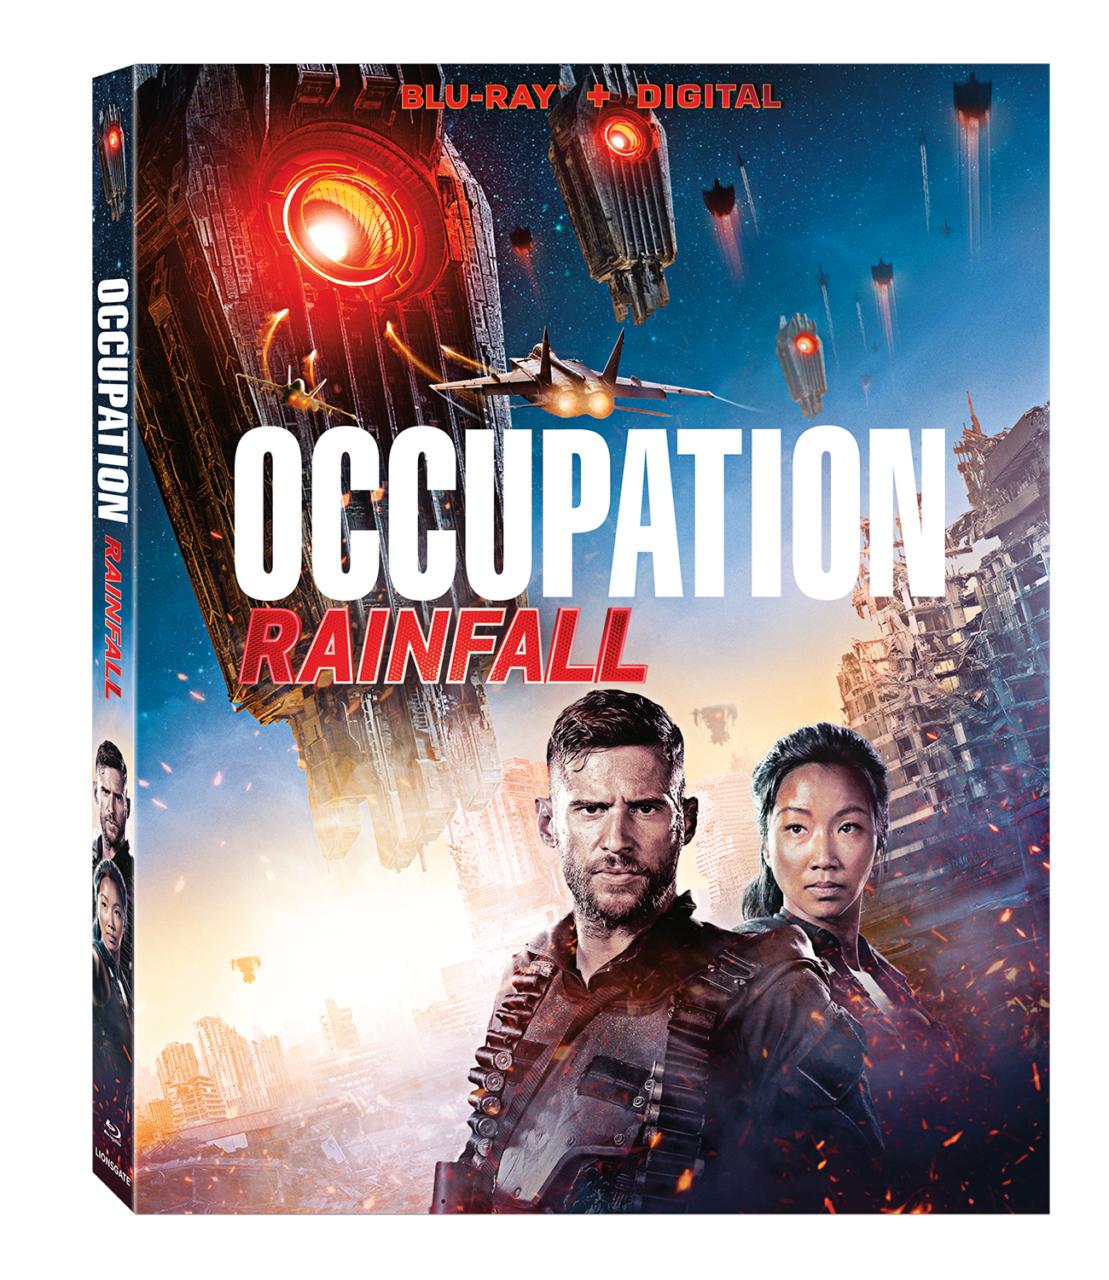 Occupation Rainfall Blu-Ray Combo Pack cover (Lionsgate)